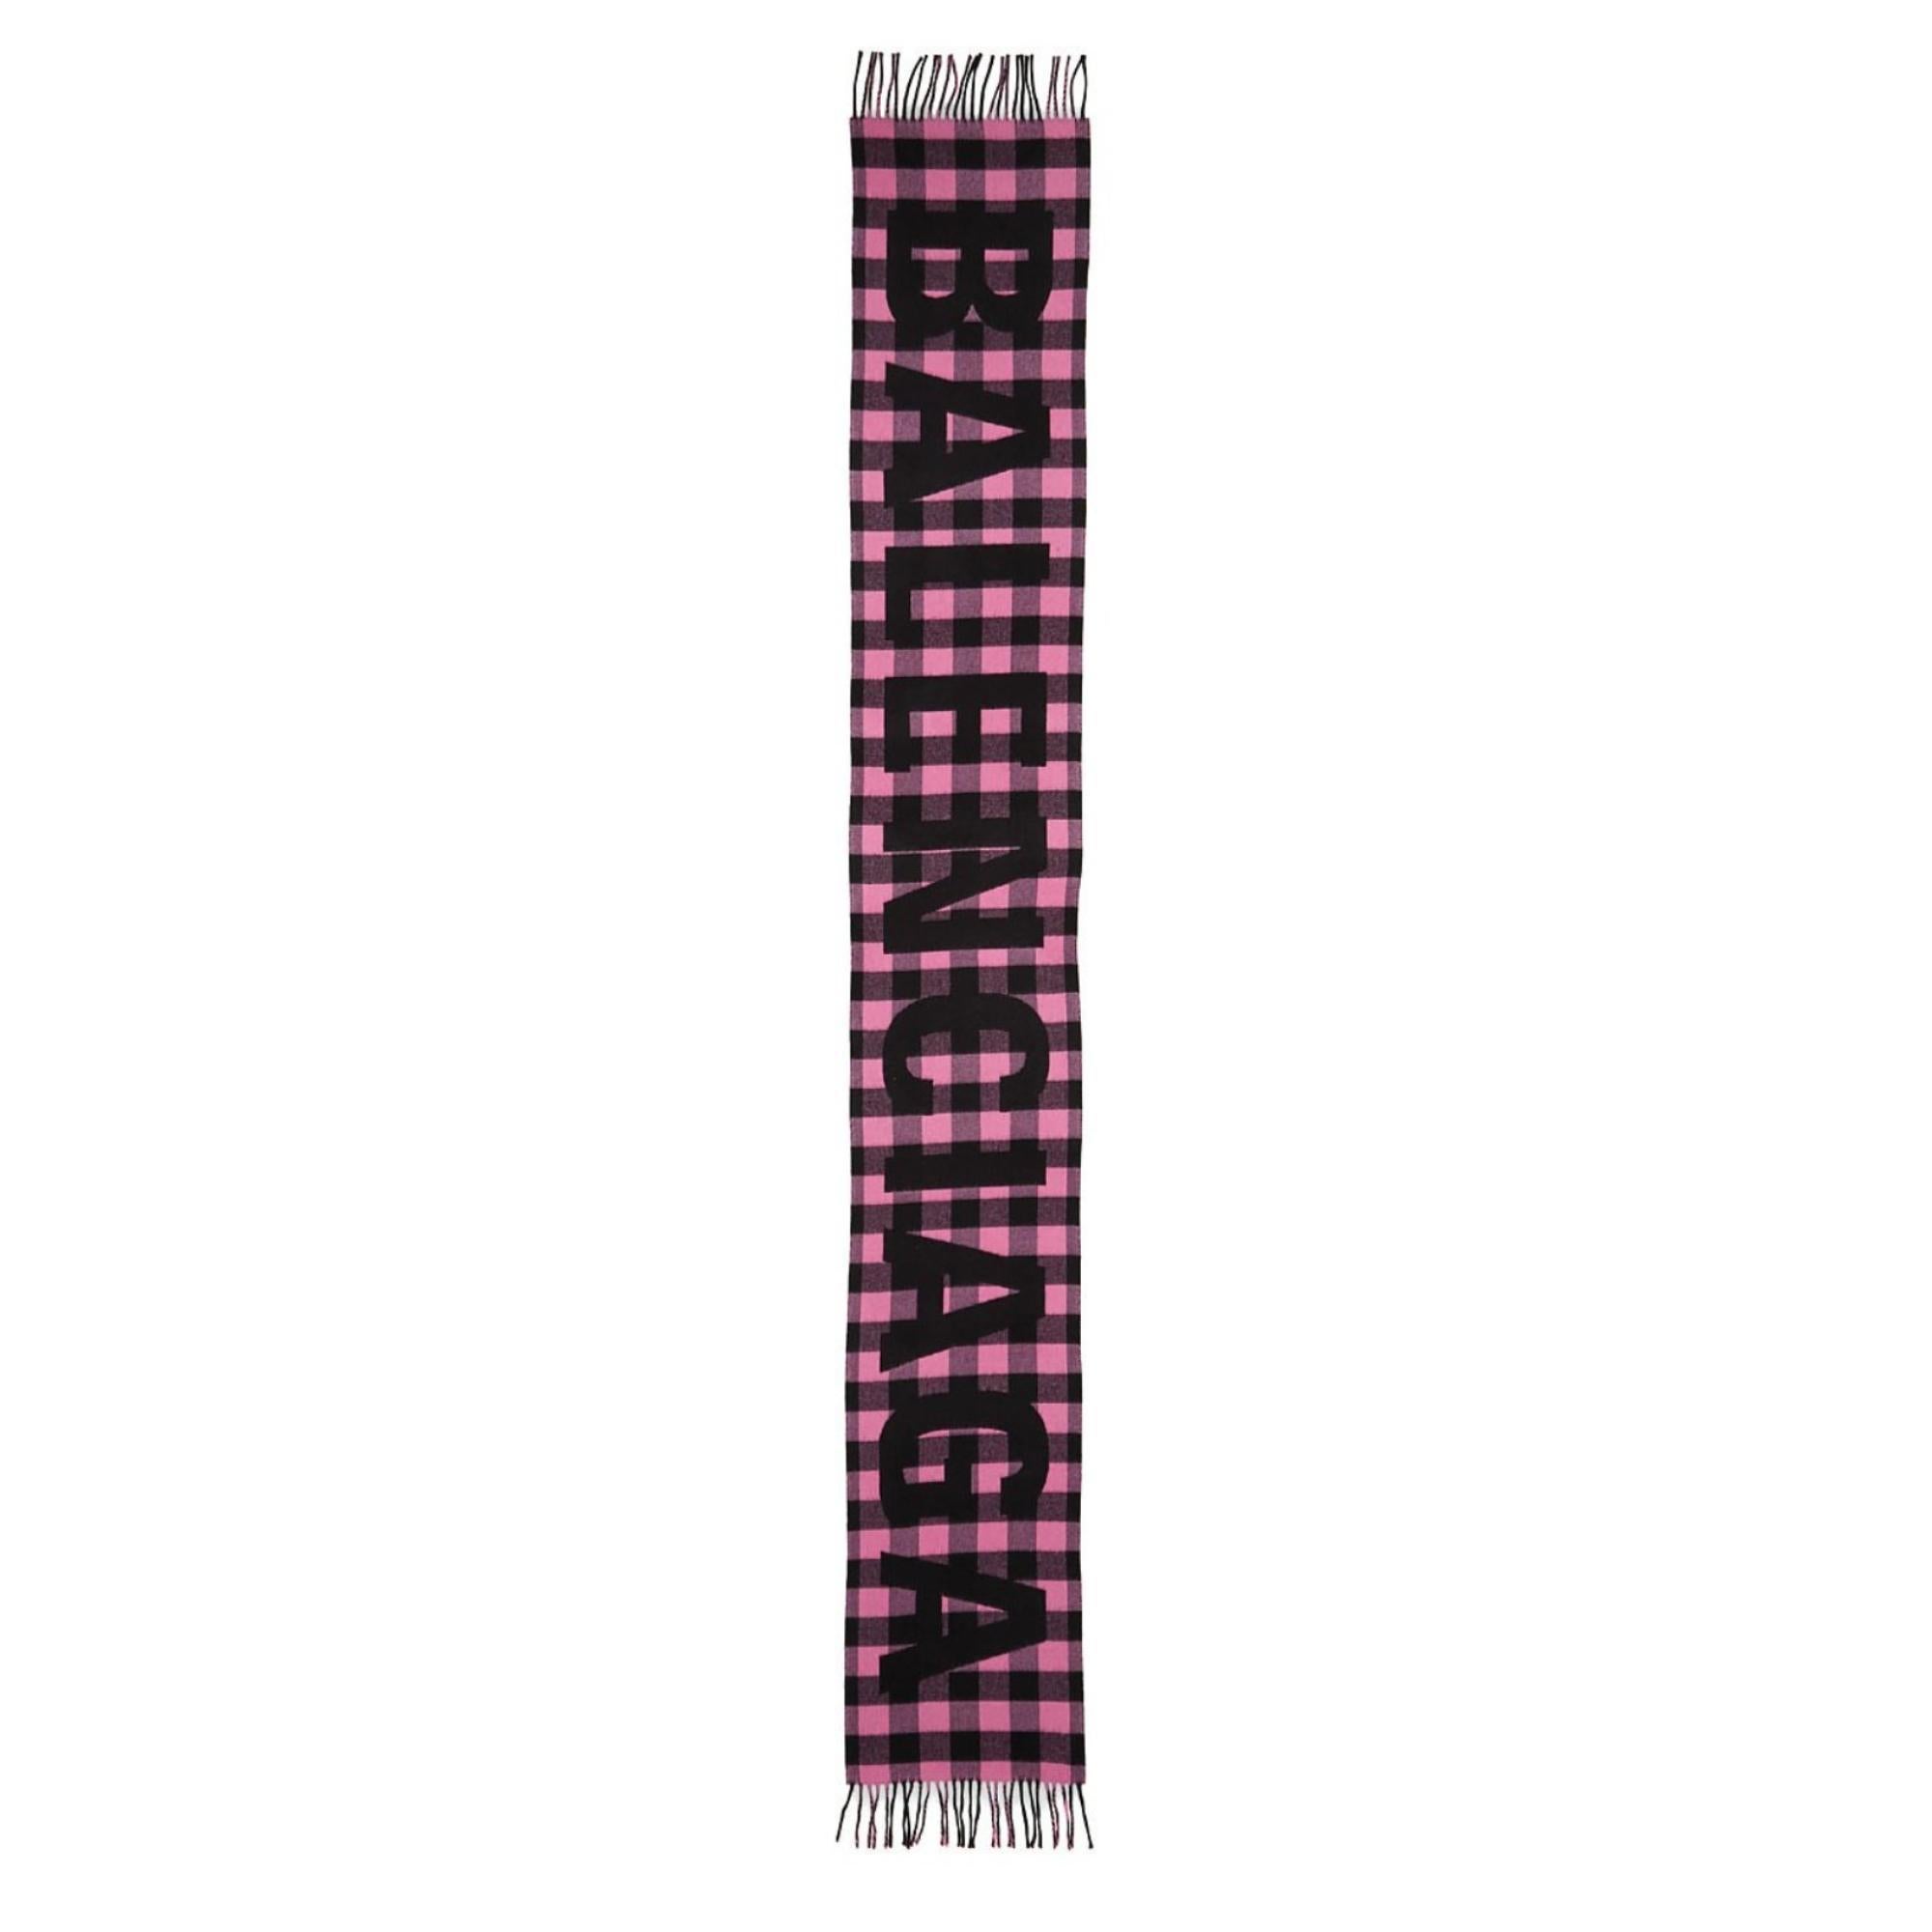 Black and pink check scarf with “Balenciaga” lettering.

COLOR: Black and pink
MATERIAL: Wool
ITEM CODE: 614831 32080 5950
MEASURES: L 88” x W 12.5” and 3” fringes
COMES WITH: Box
CONDITION: Excellent - item is pristine. Like new.

Made in Italy